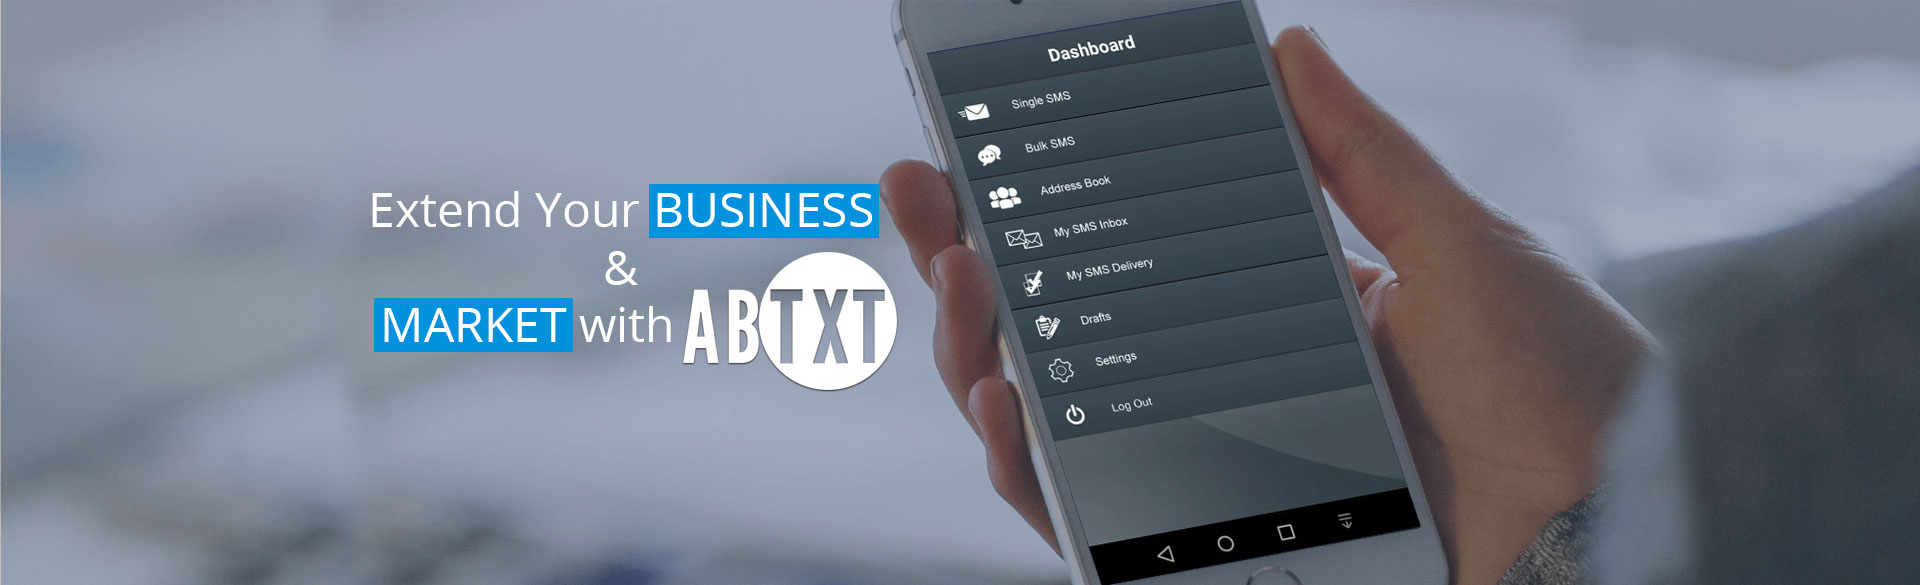 extend business with ABTXT